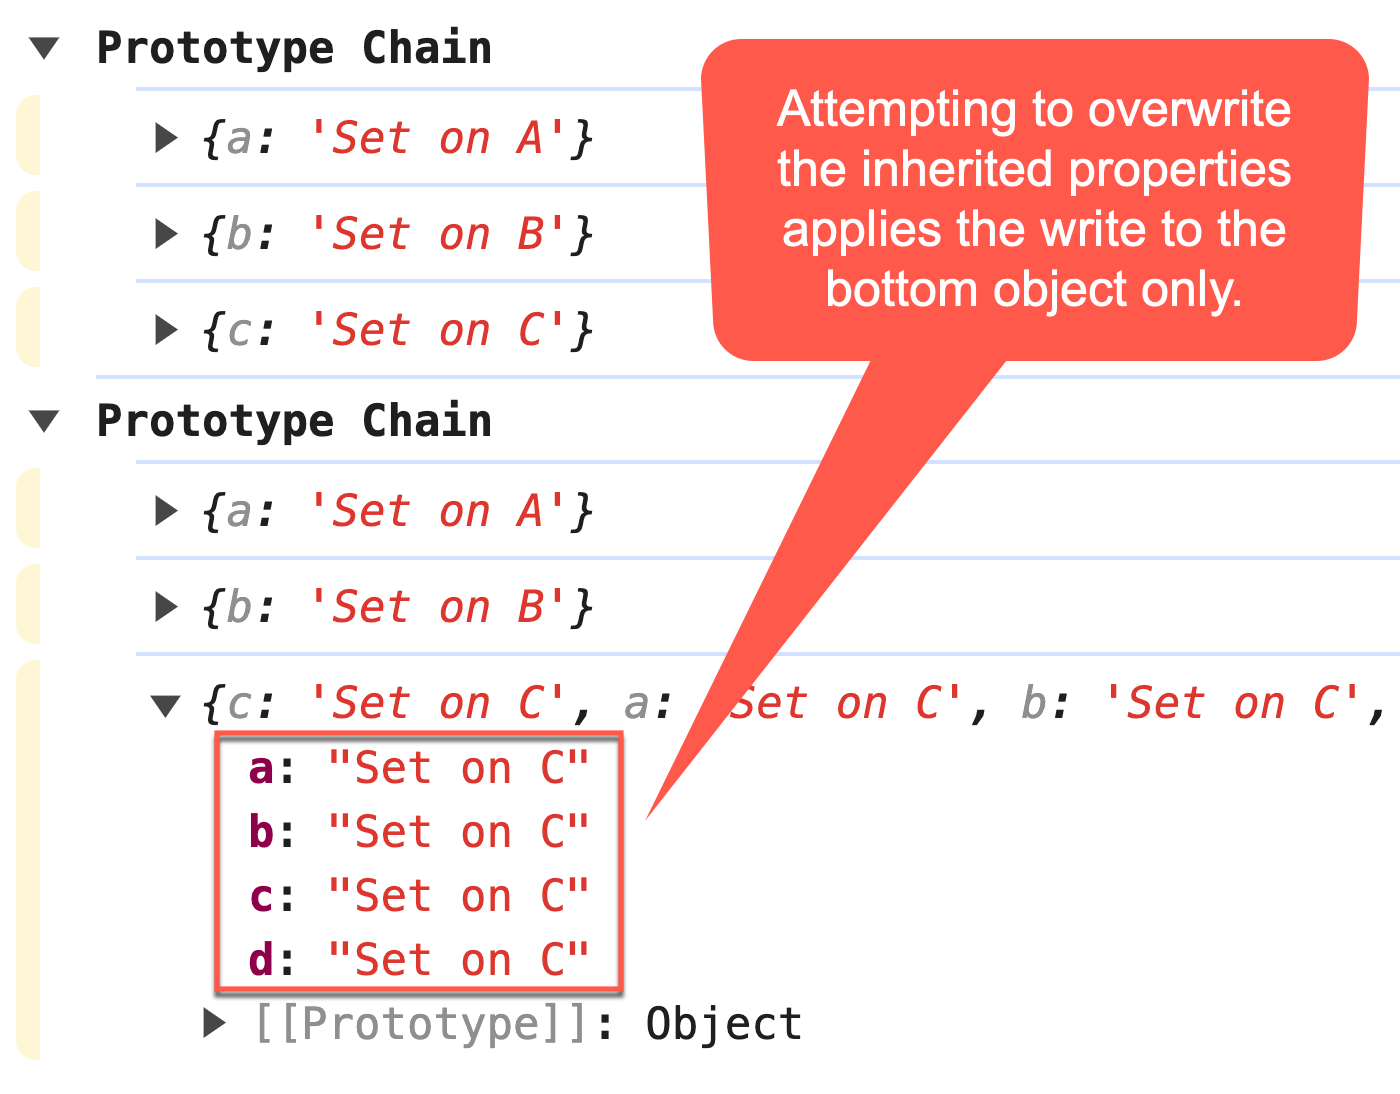 Console output showing native data access behavior of the prototype chain in JavaScript: all properties are written to the lowest object in the prototype chain.